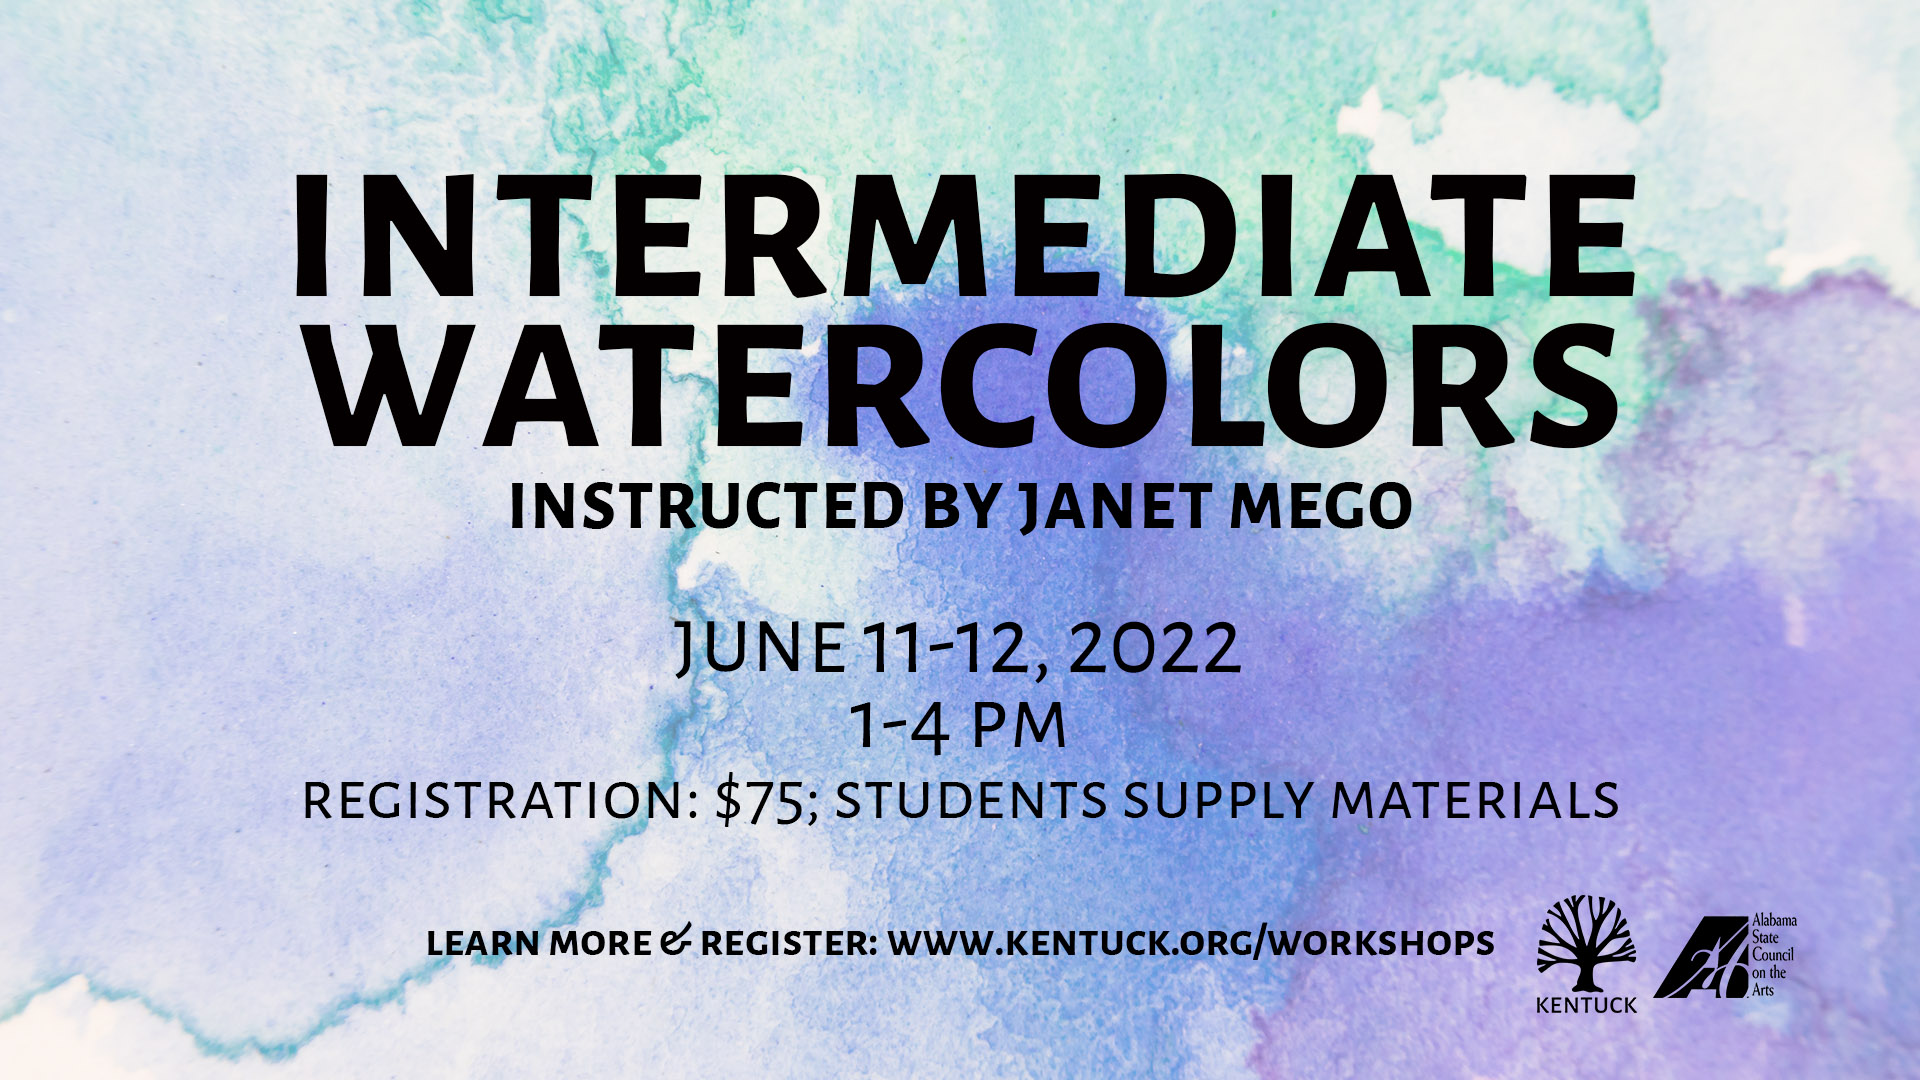 Intermediate Watercolors with Janet Mego